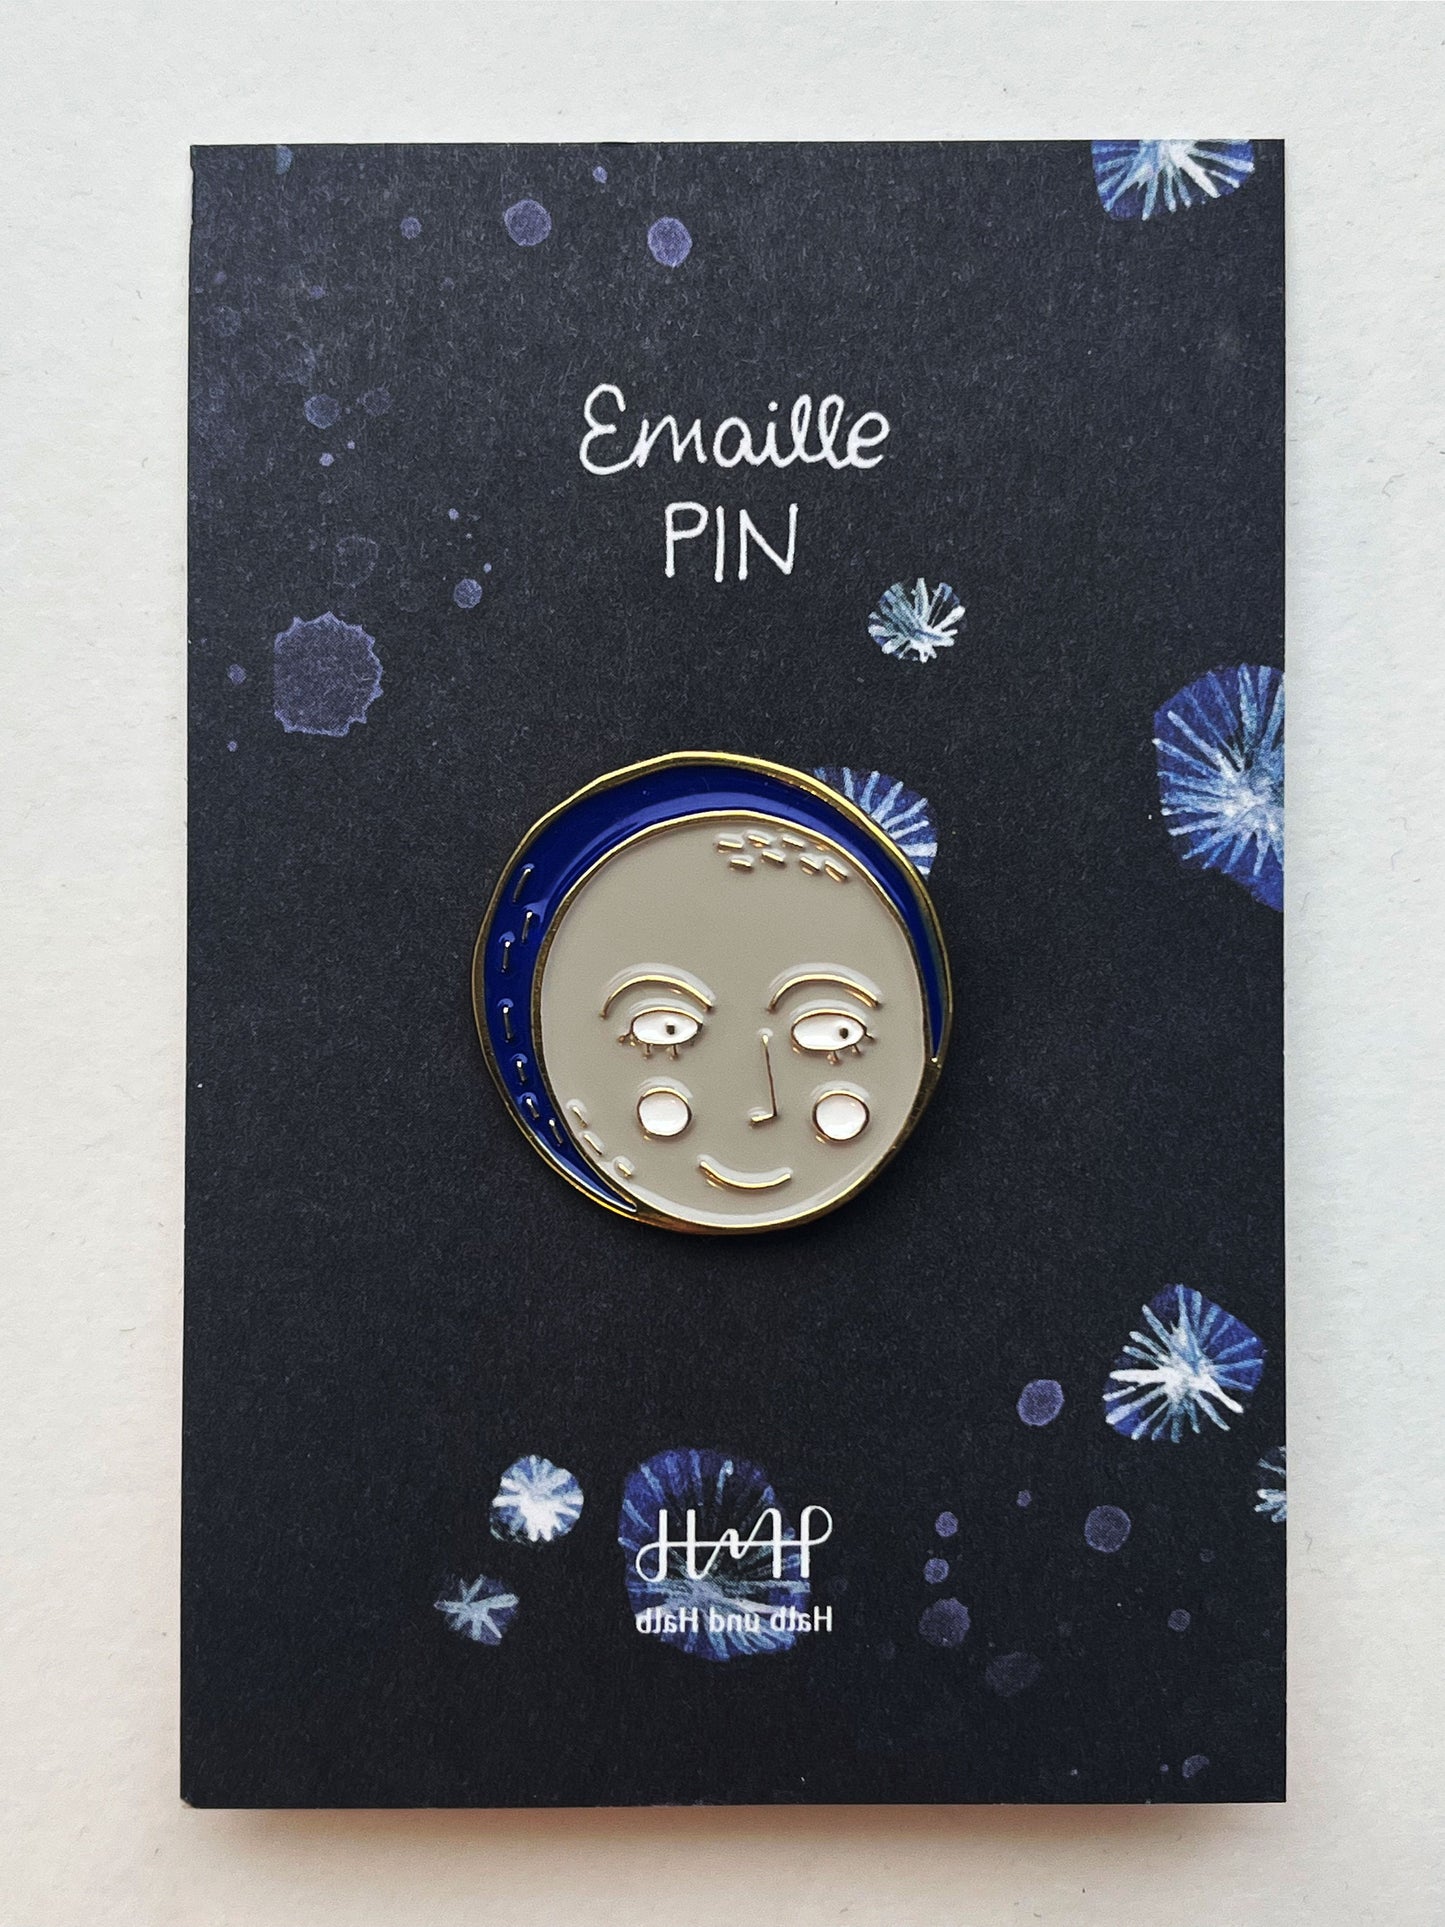 Emaillepin Softemaille Mond